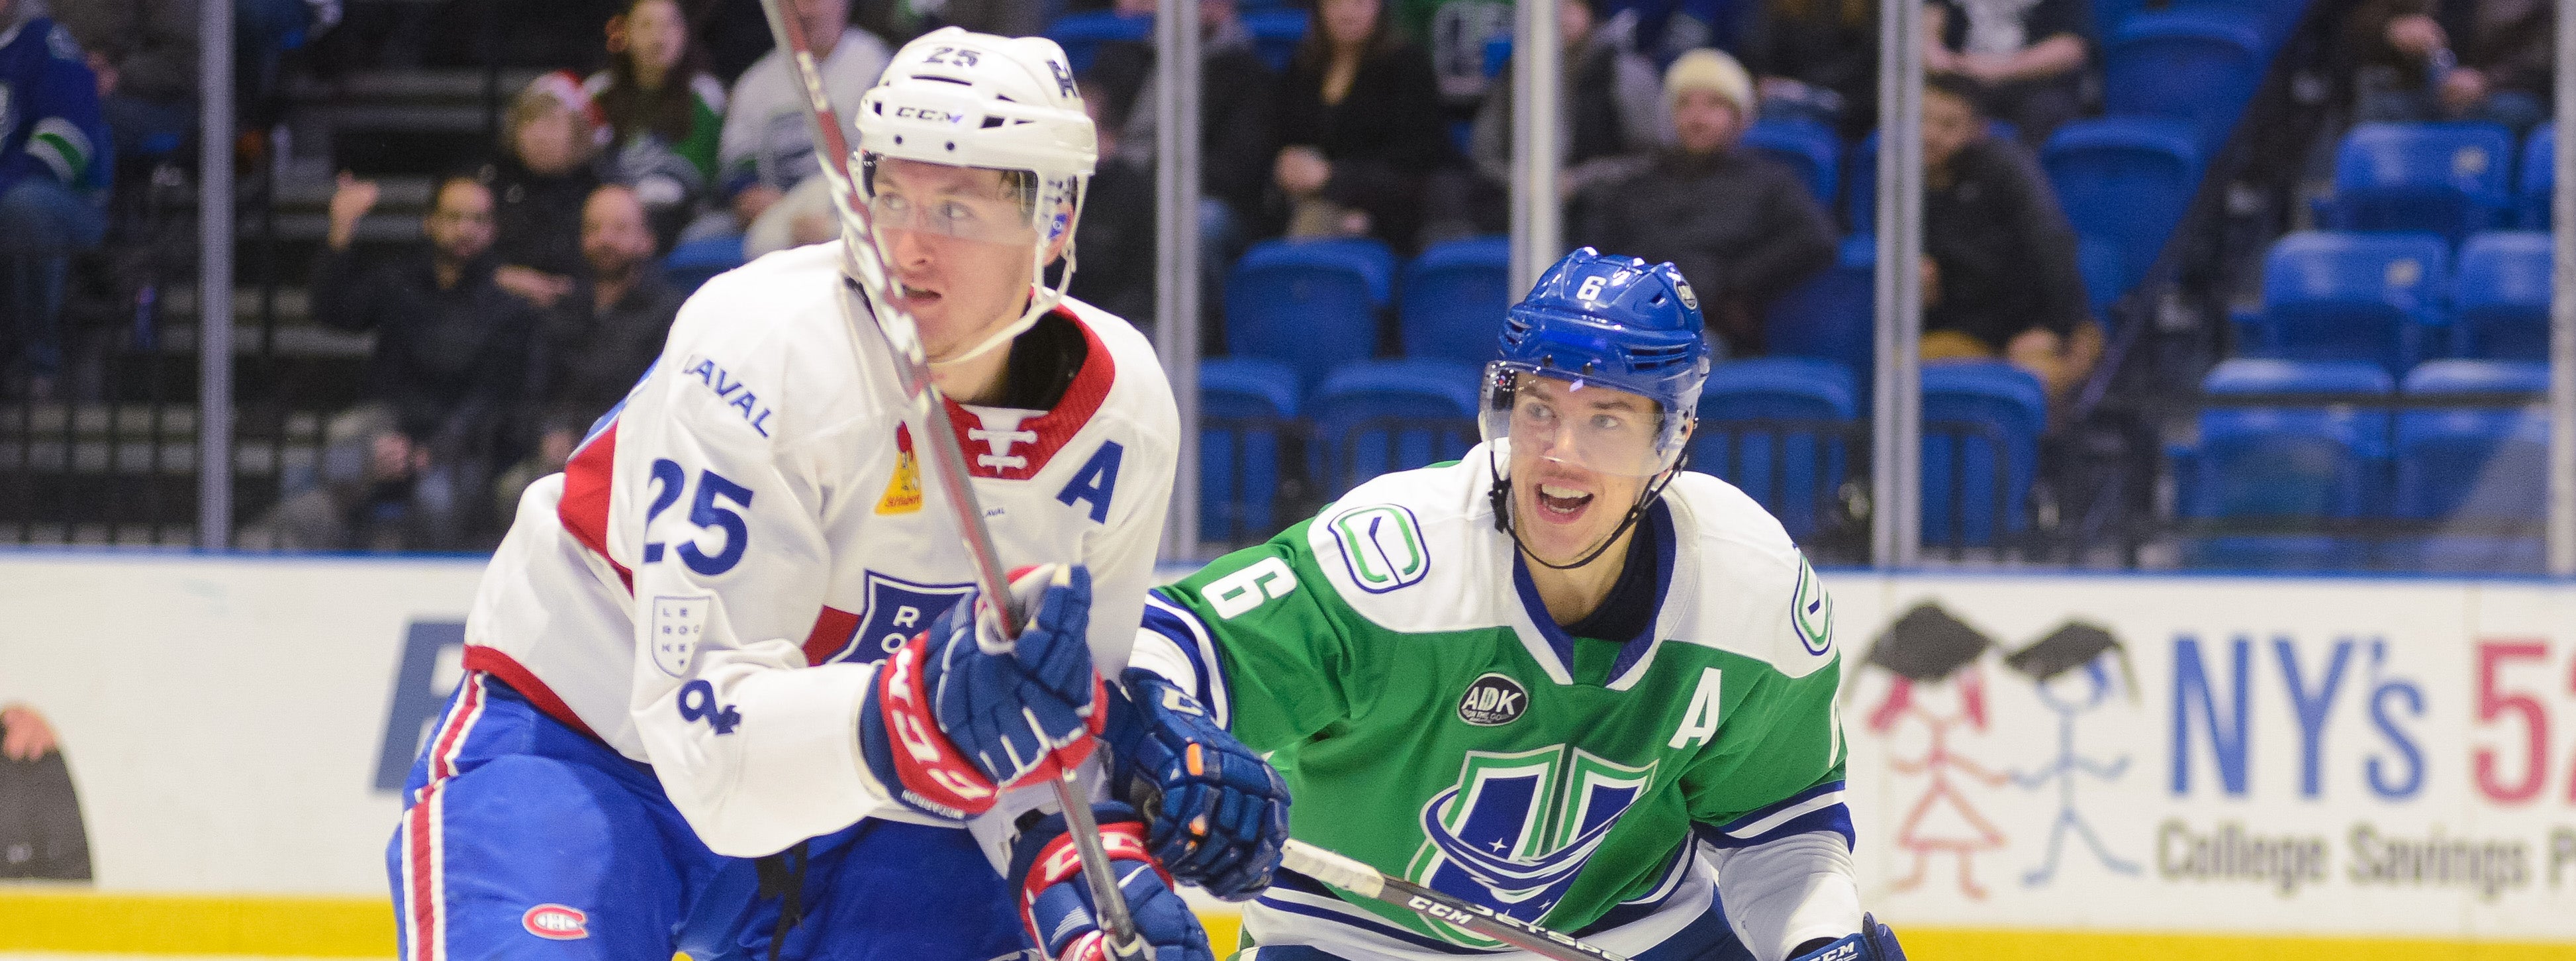 COMETS END FOUR-GAME ROAD TRIP IN LAVAL